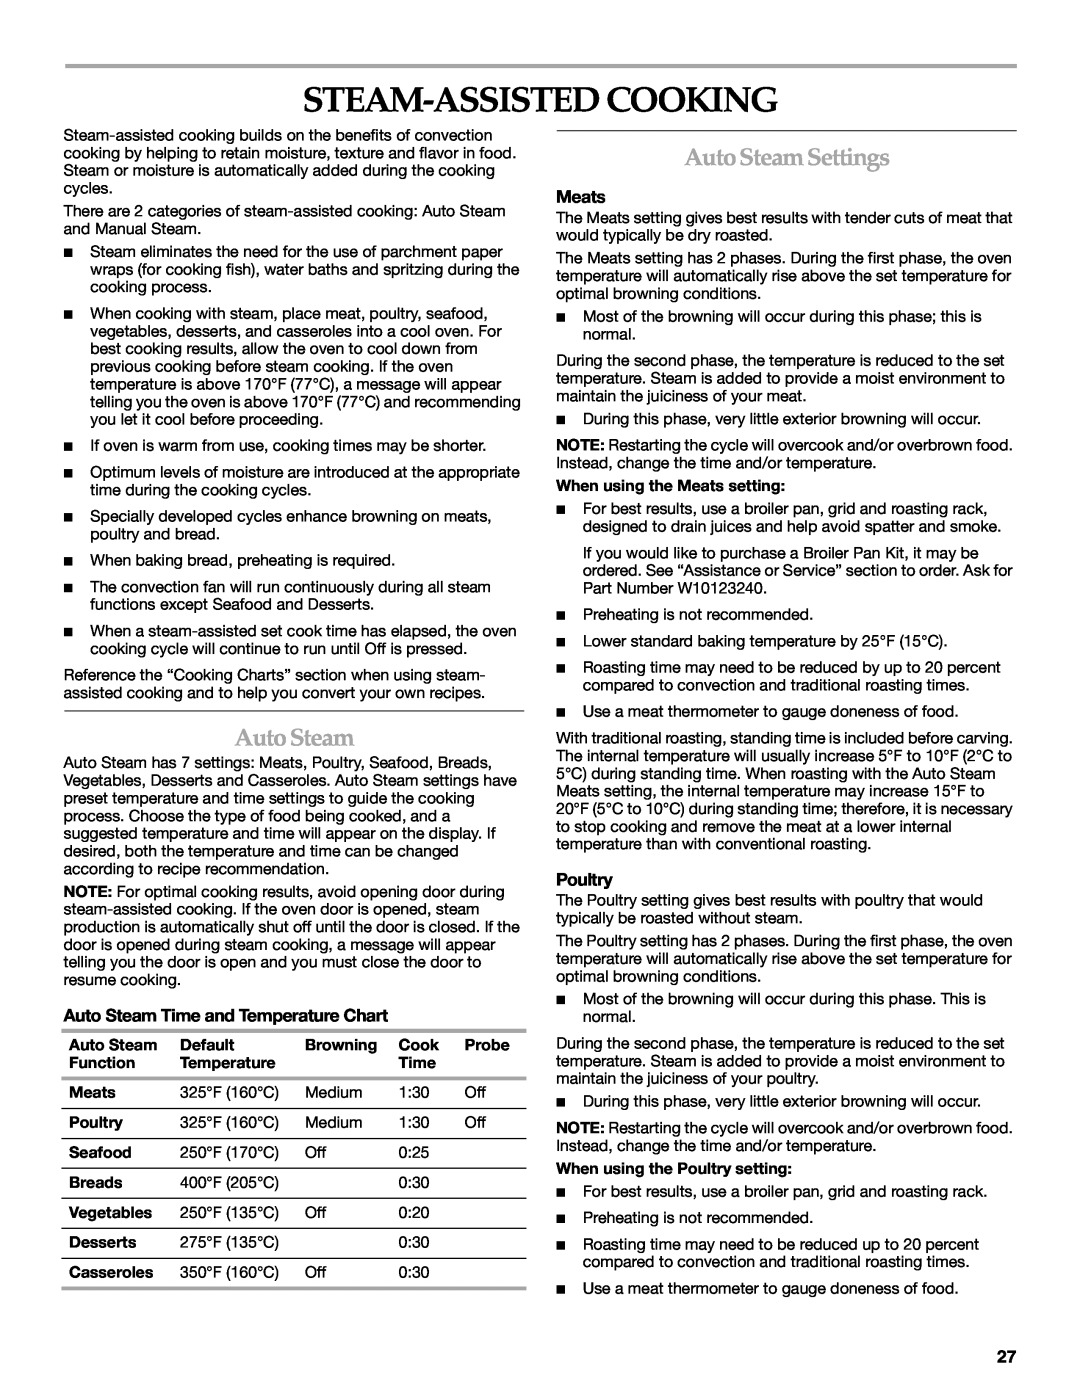 KitchenAid KDRU763.KDRU manual Steam-Assisted Cooking, AutoSteamSettings, Auto Steam Time and Temperature Chart, Meats 